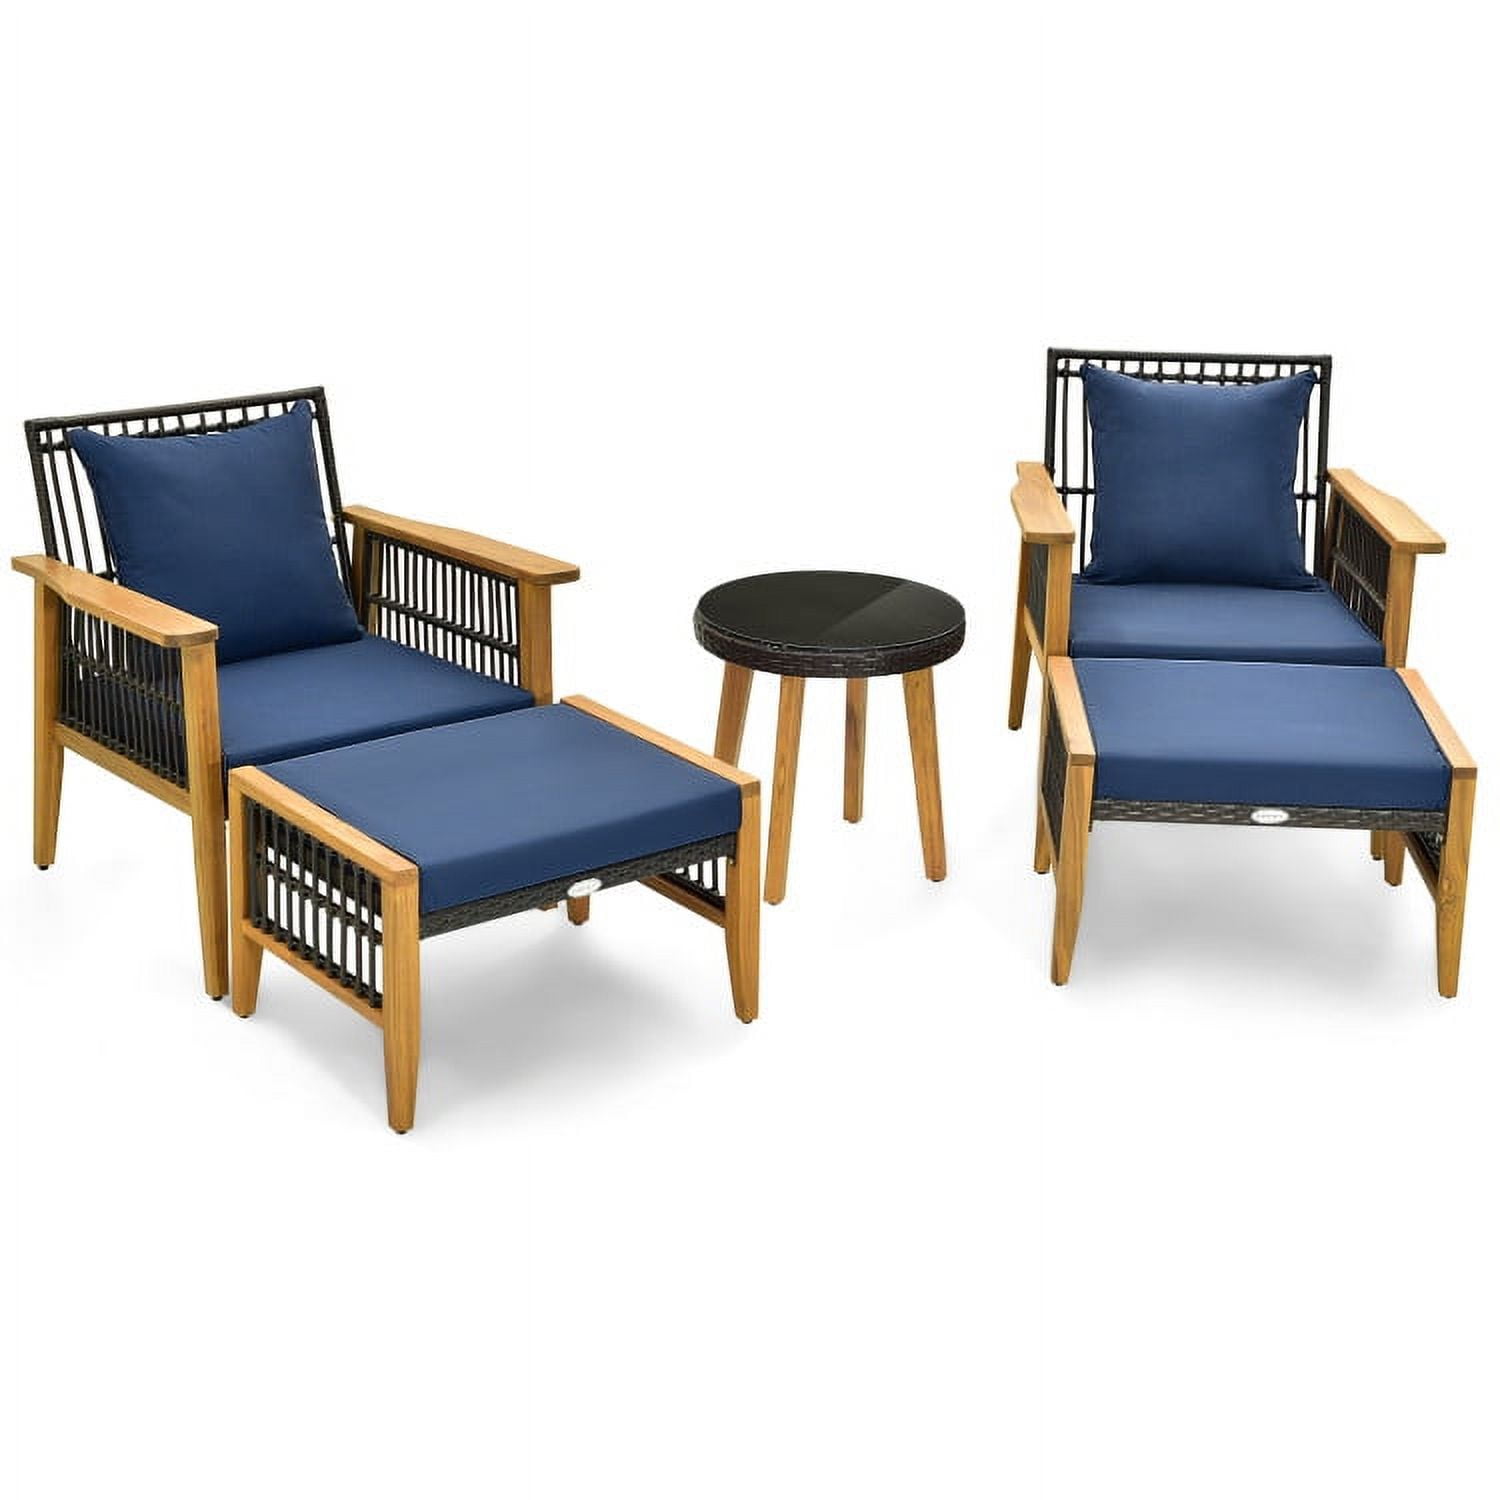 Aimee Lii 5 Piece Outdoor Conversation Set with Stable Acacia Wood Frame, Outdoor Patio Set, Navy